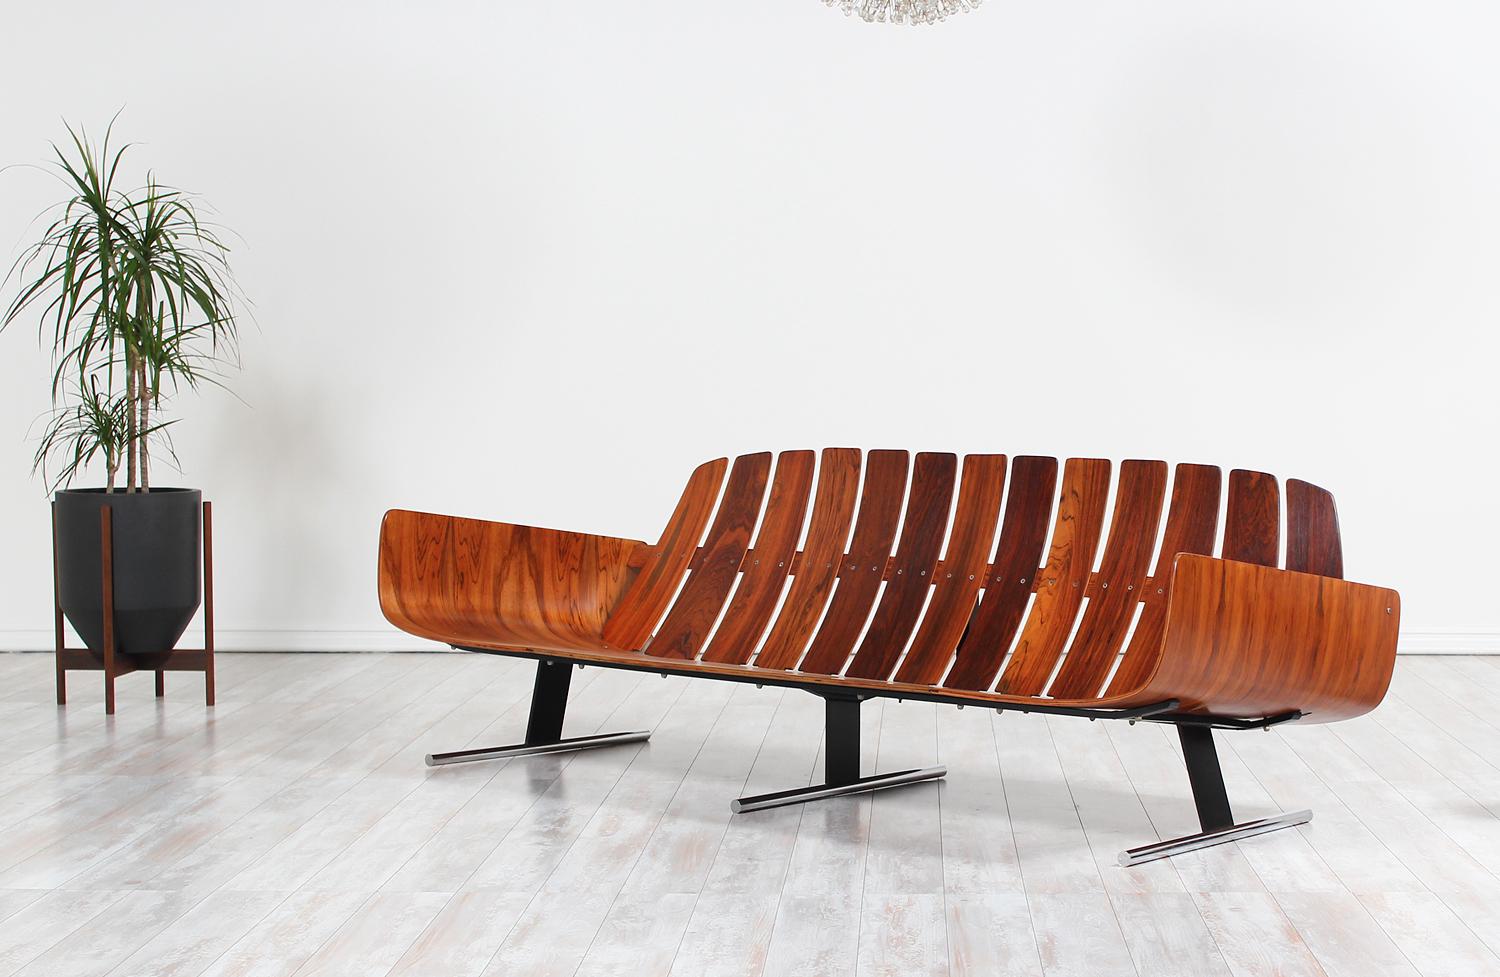 Mid-20th Century Jorge Zalszupin “Presidencial” Rosewood Sofa for L’atelier